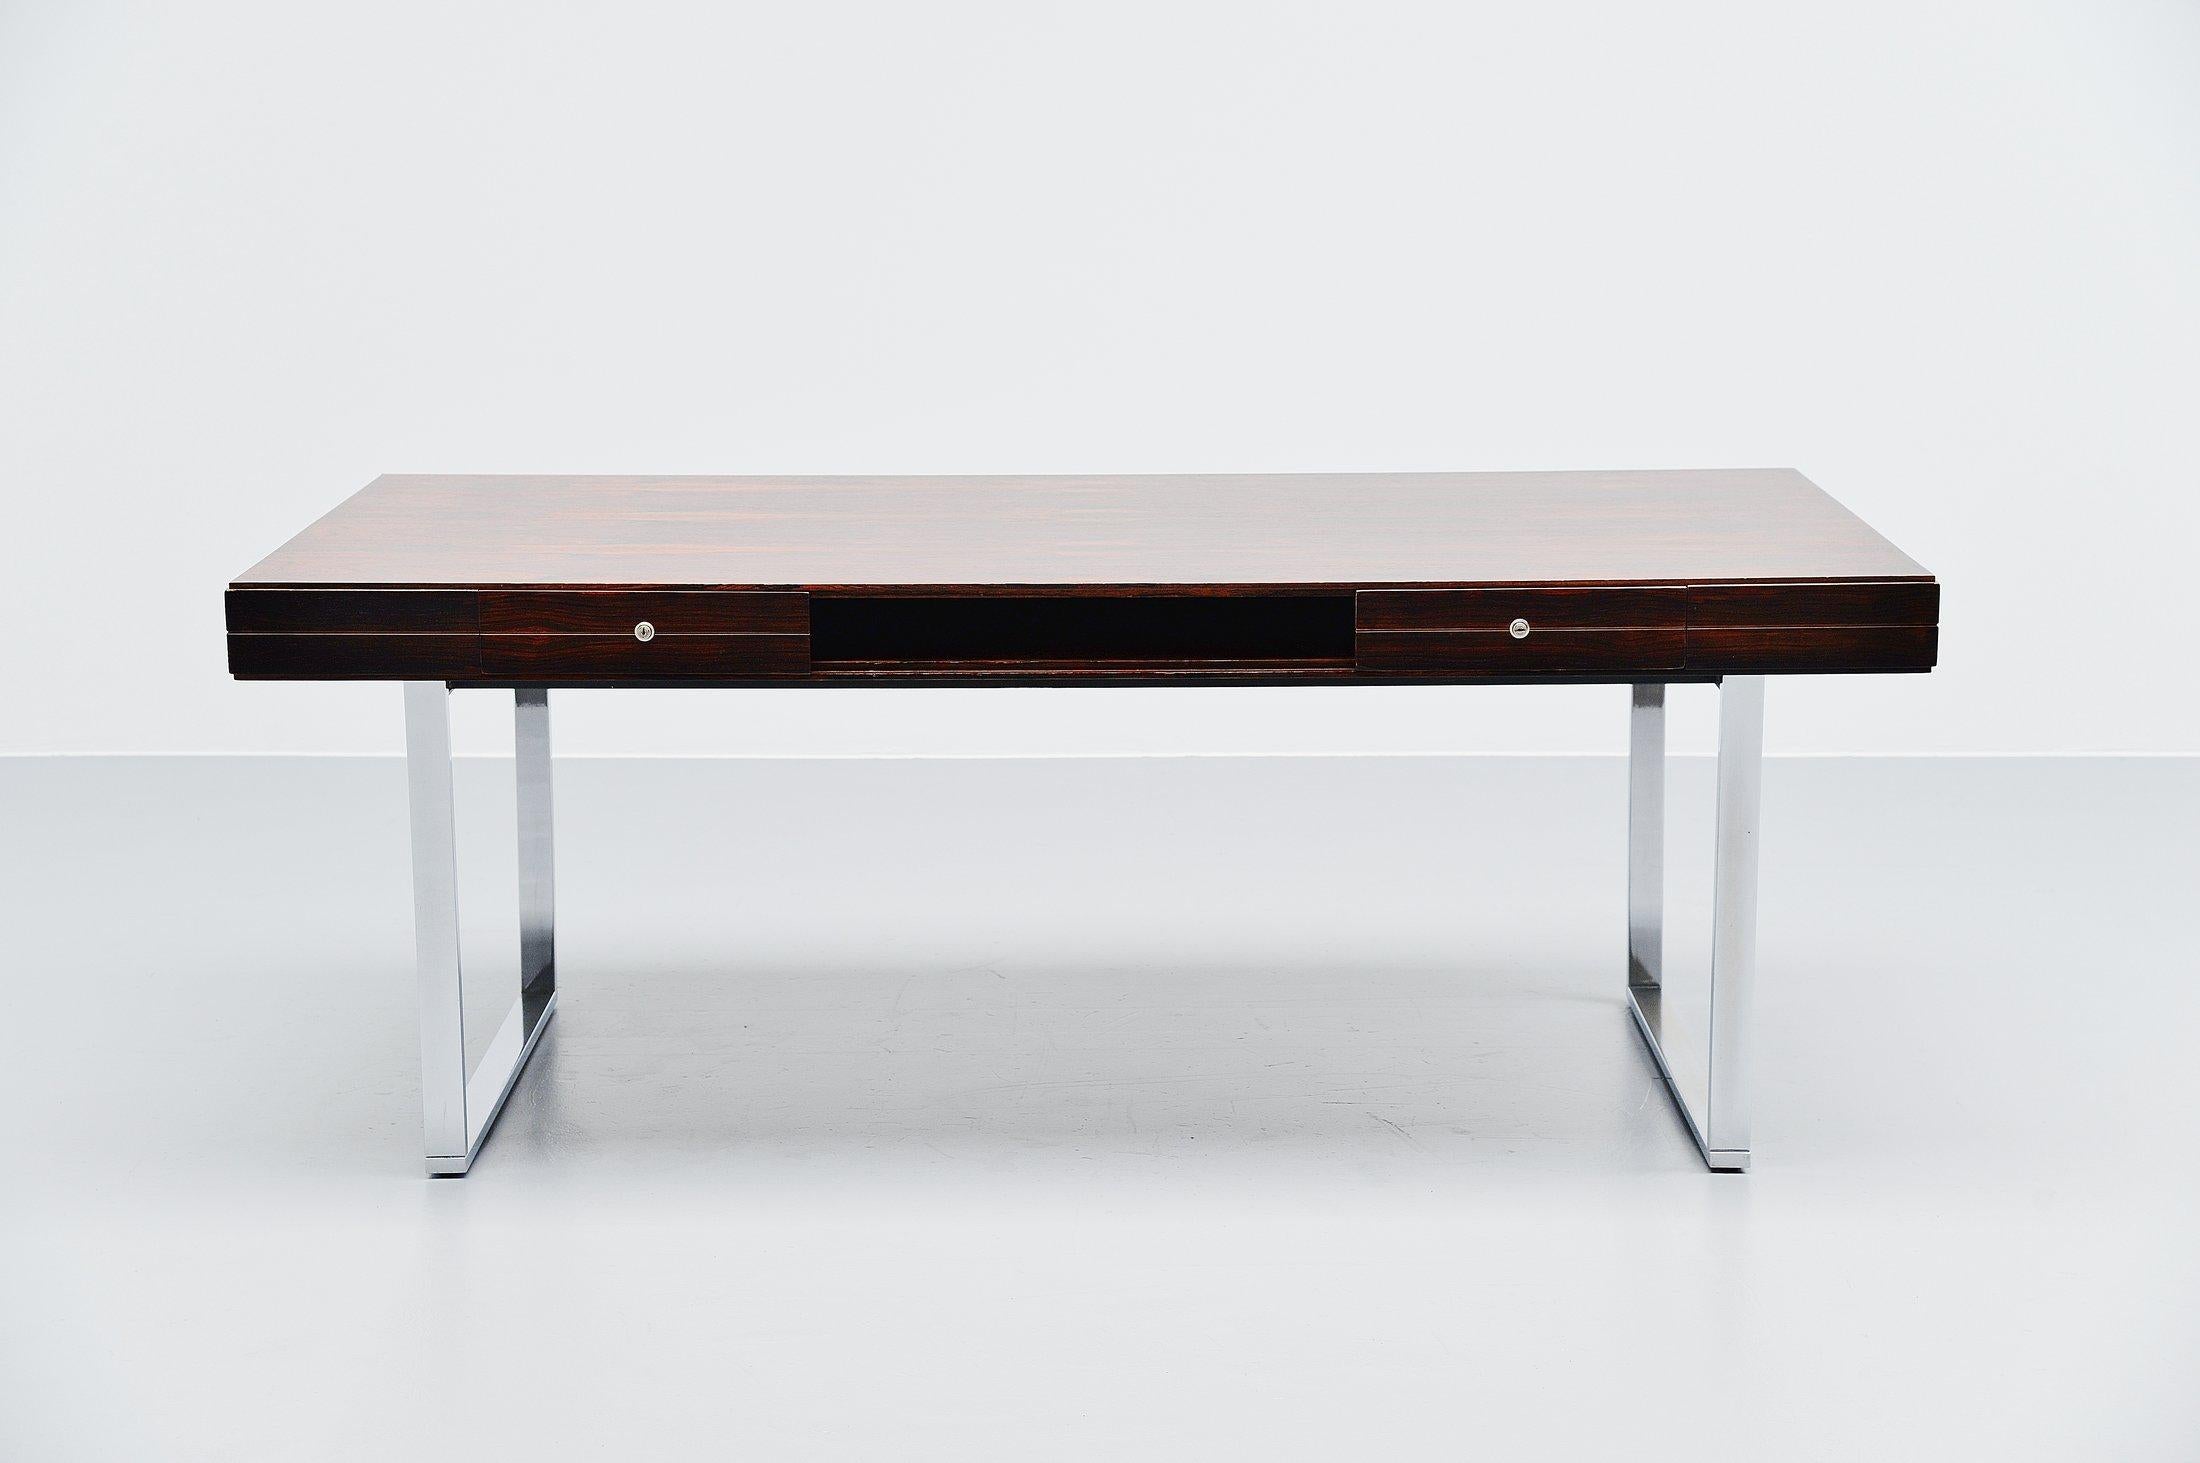 Fantastic Minimalist rosewood desk made by unknown manucaturerer, Denmark 1960. The desk is very well crafted, a floating rosewood casing supported by chrome-plated legs. Very nicely dynamic shaped desk which has been fully refinished. The desk has